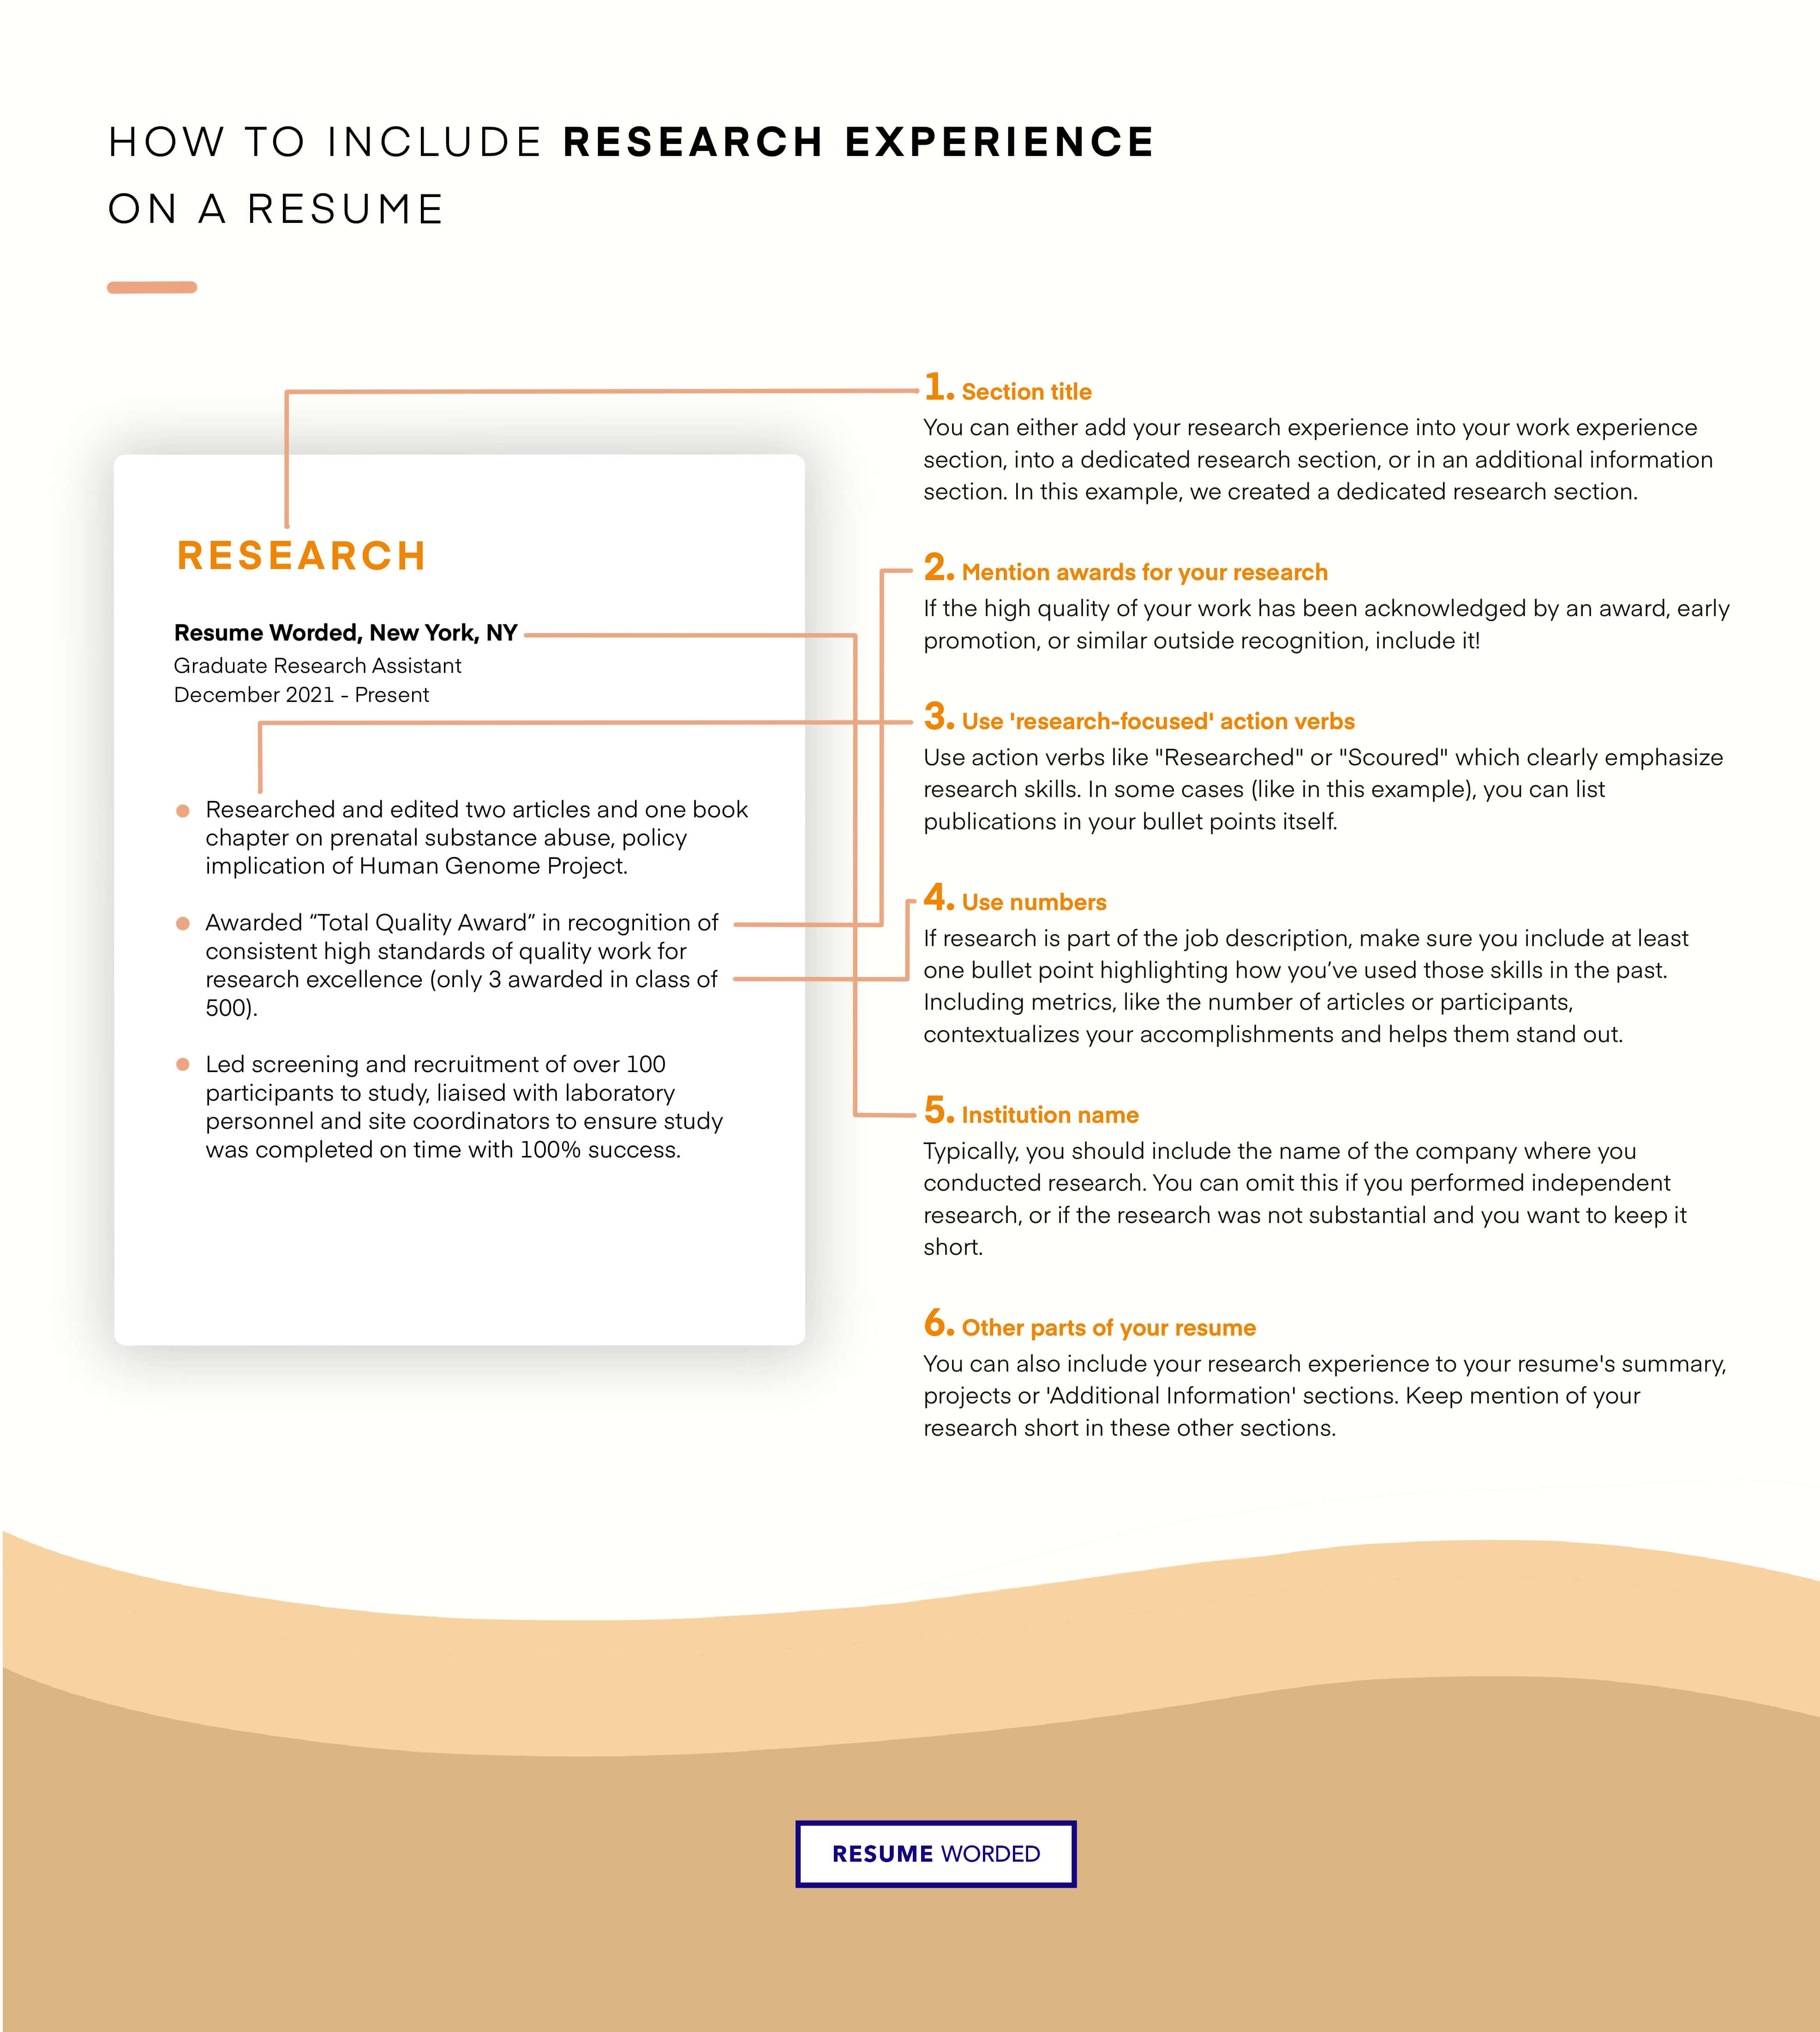 Emphasise real-world applications of your research - Graduate Research Assistant CV